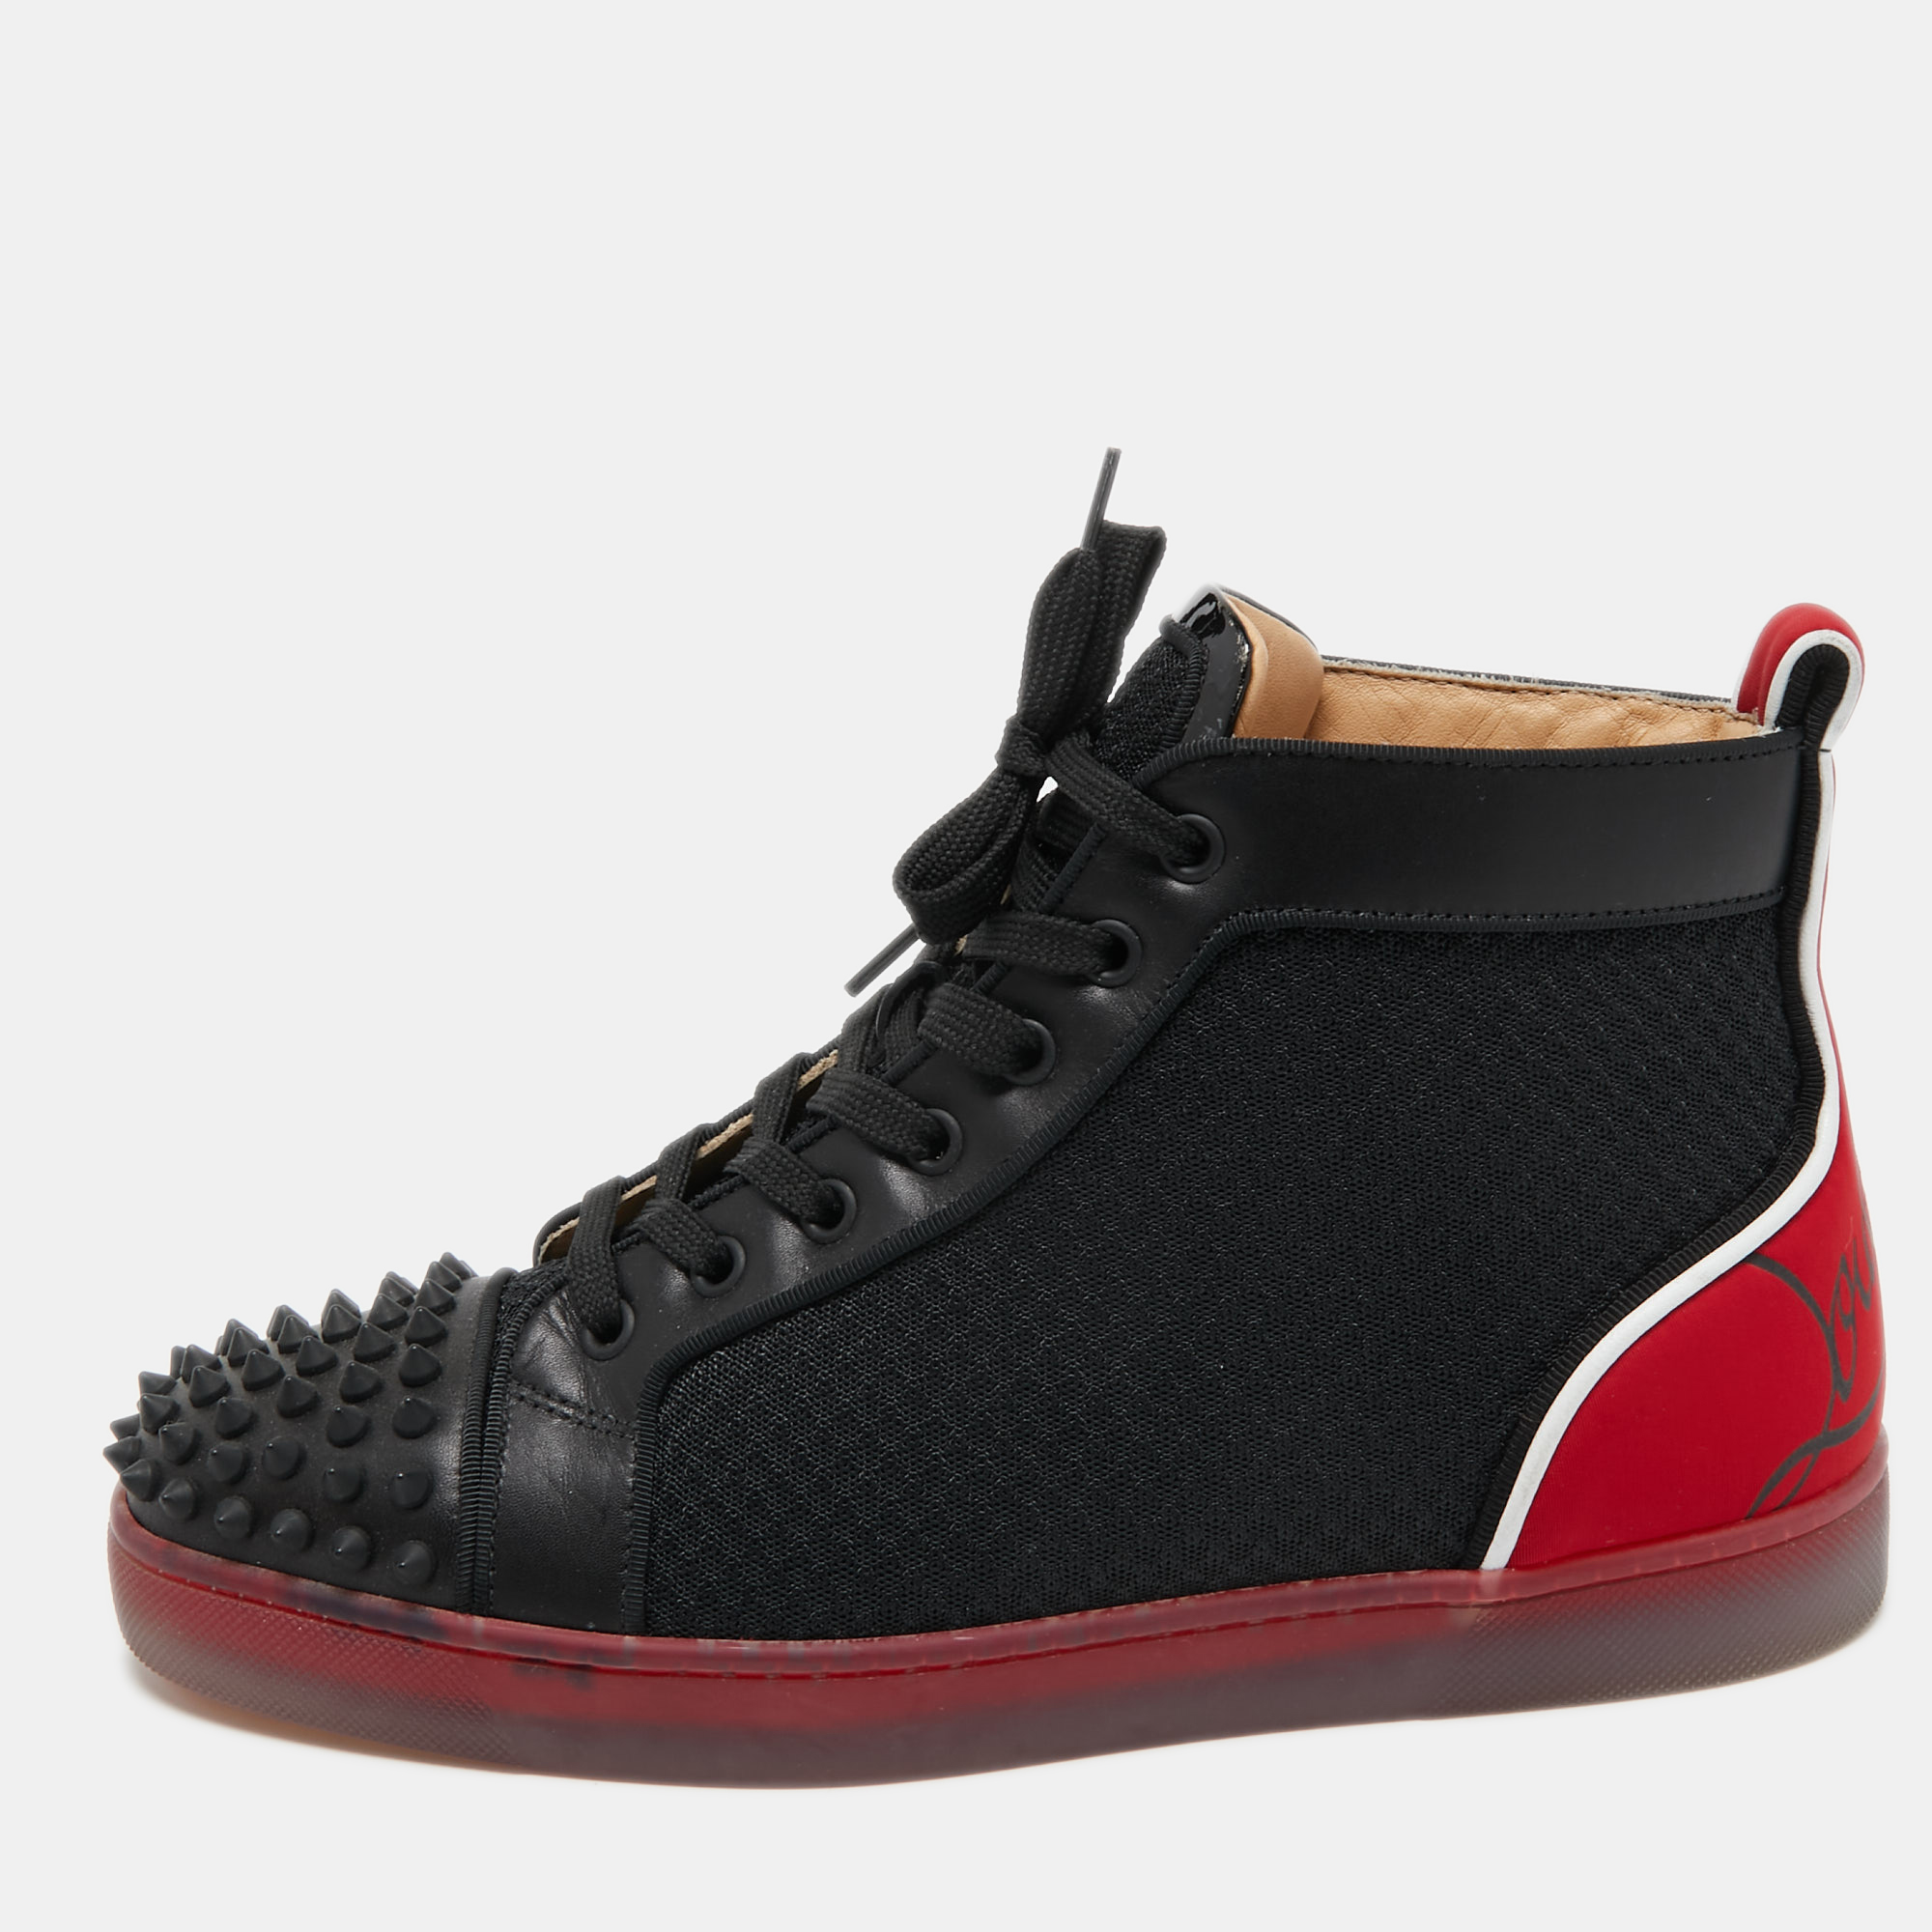 Pre-owned Christian Louboutin Black/red Leather, Mesh And Neoprene Louis Spikes Orlato Sneakers Size 40